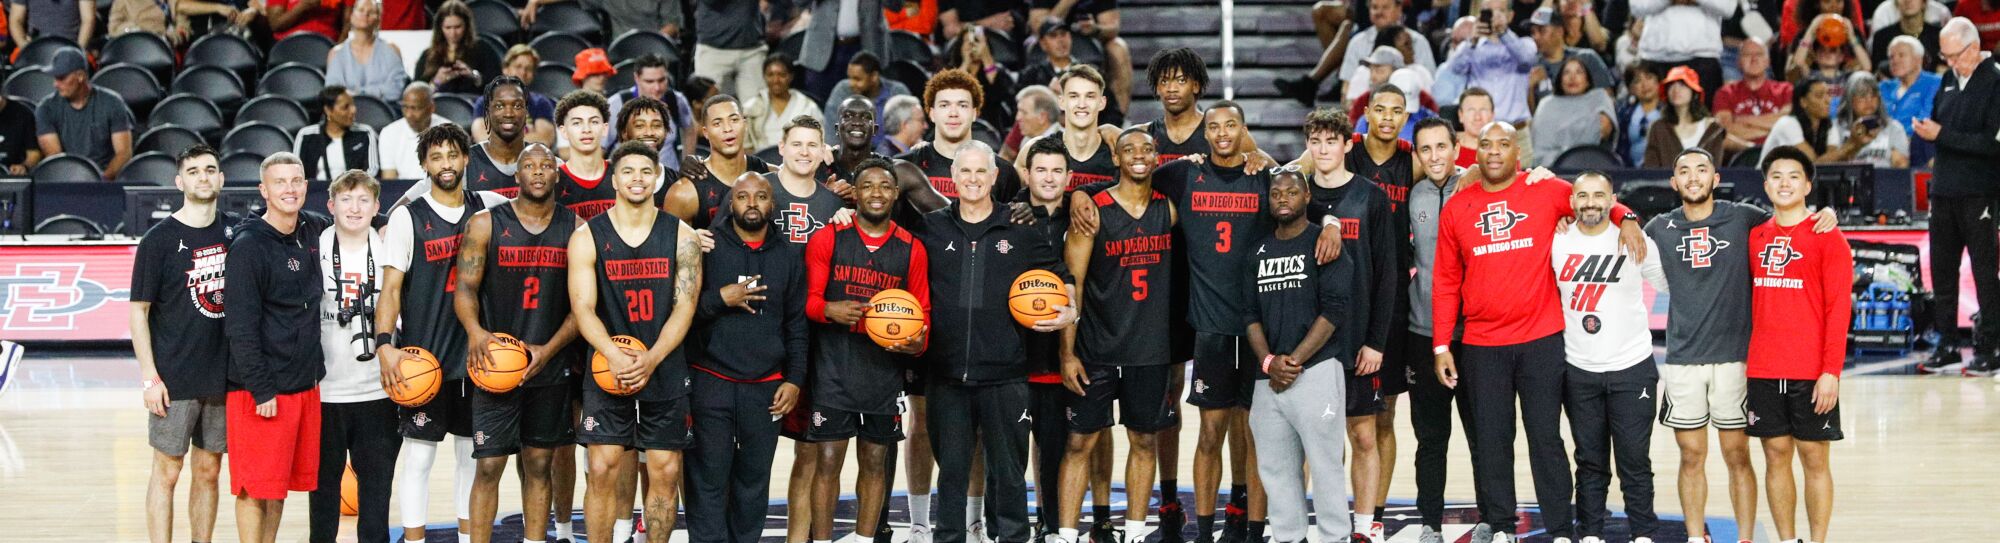 Houston, Texas - March 31: San Diego State players pose for a team photo during a practice leading up to the Final Four at the NRG Stadium on Friday, March 31, 2023 in Houston, Texas. (Meg McLaughlin / The San Diego Union-Tribune)